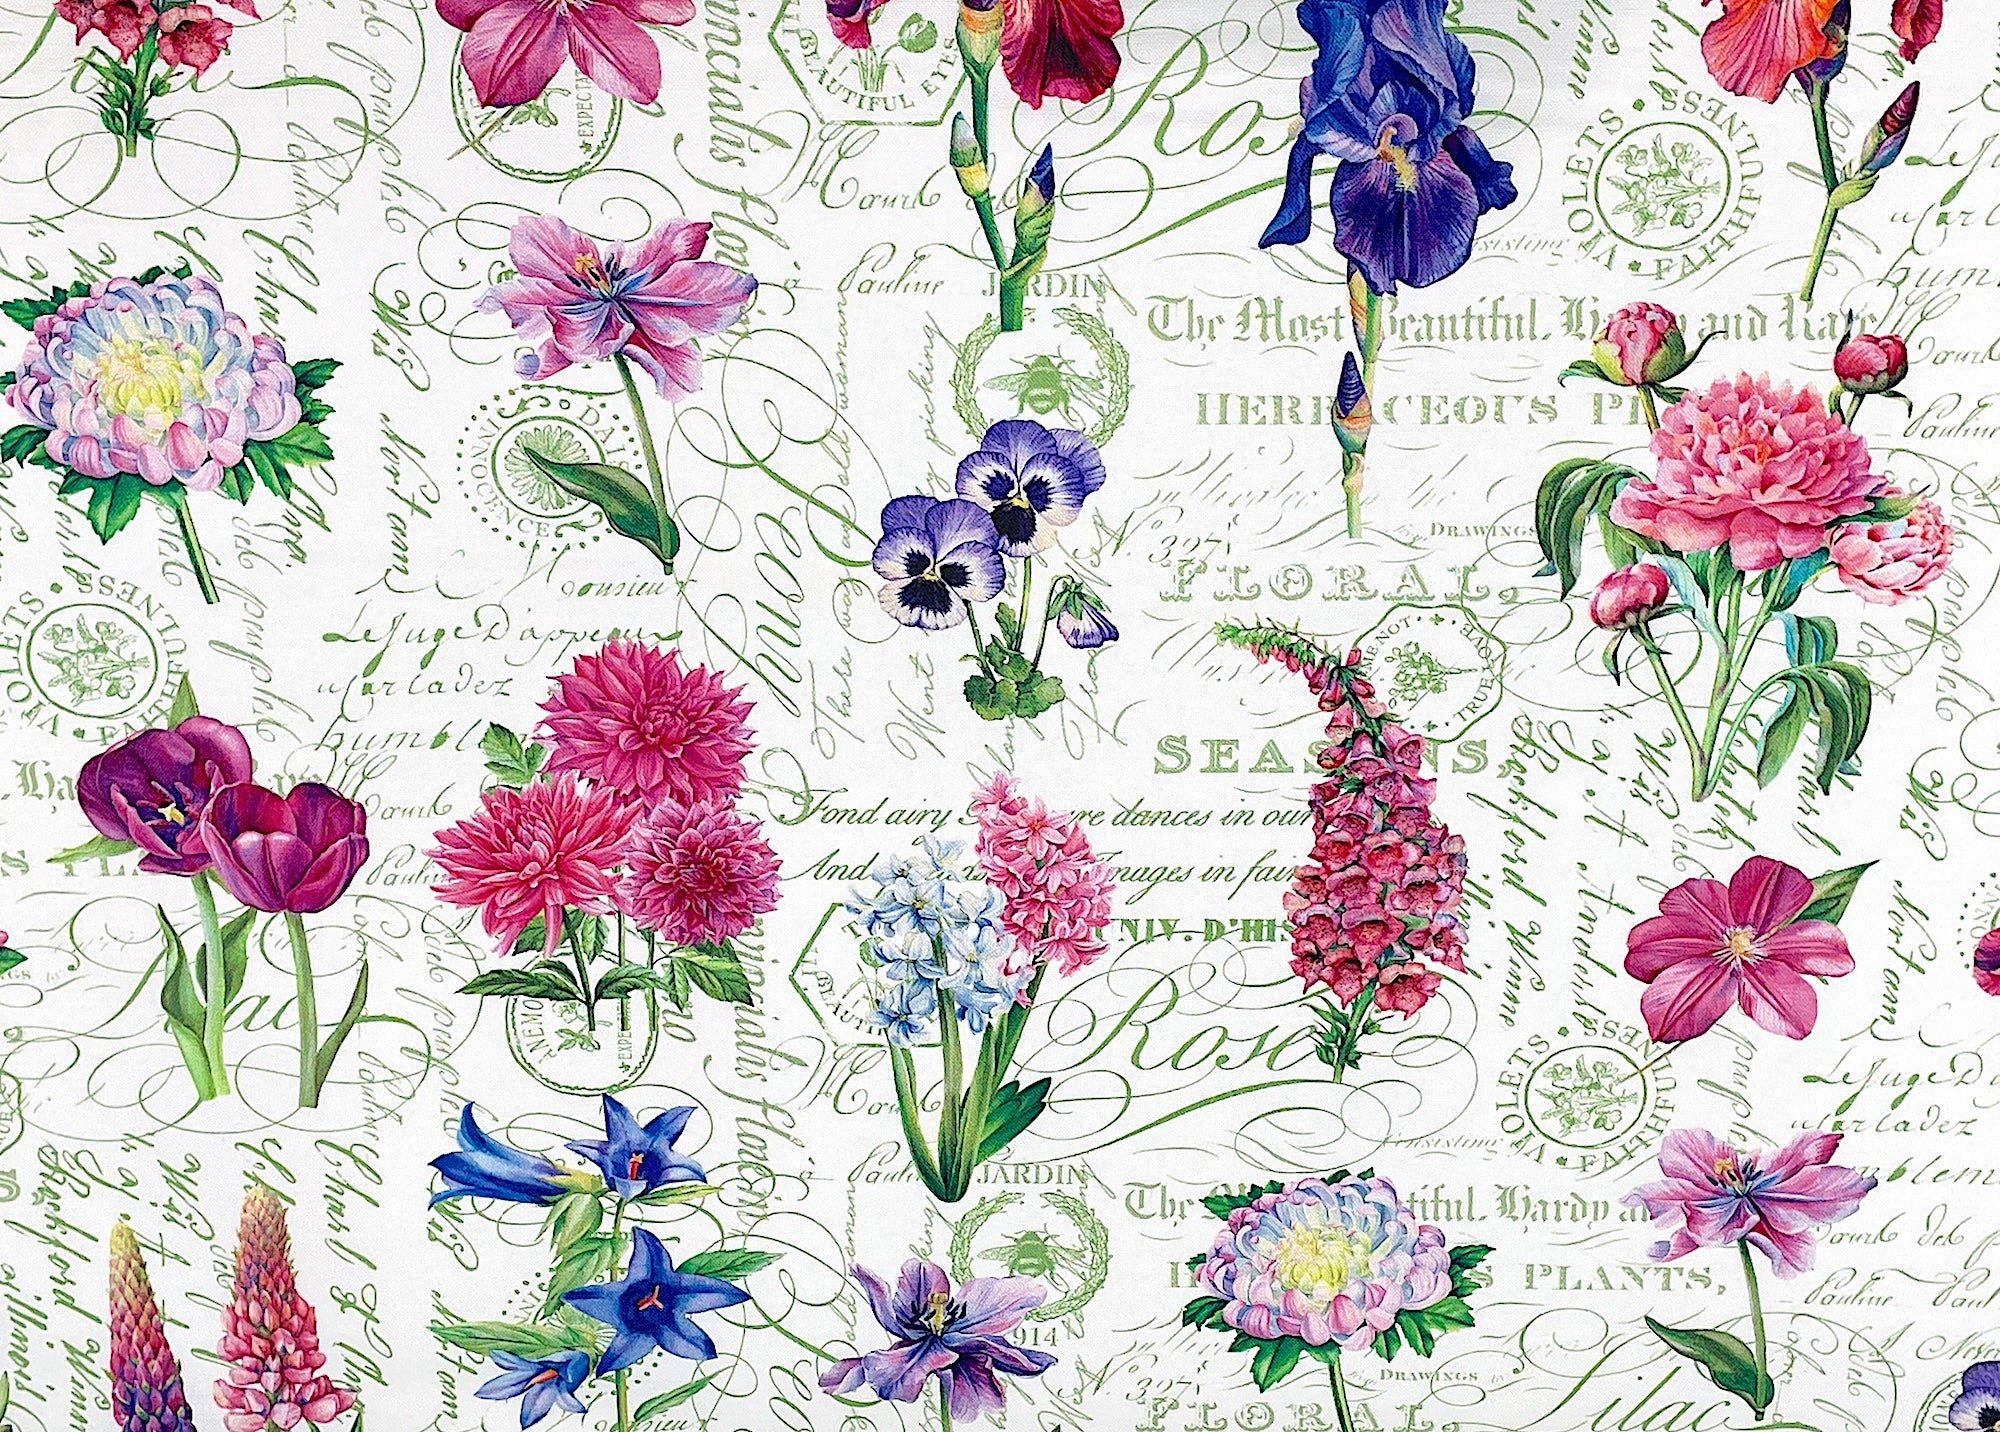 From Northcott Fabrics this white toile fabric is covered with snapdragons, iris, peonies and other pink and purple flowers.&nbsp; This fabric is part of Deborah's Garden collection by Northcott Fabrics.